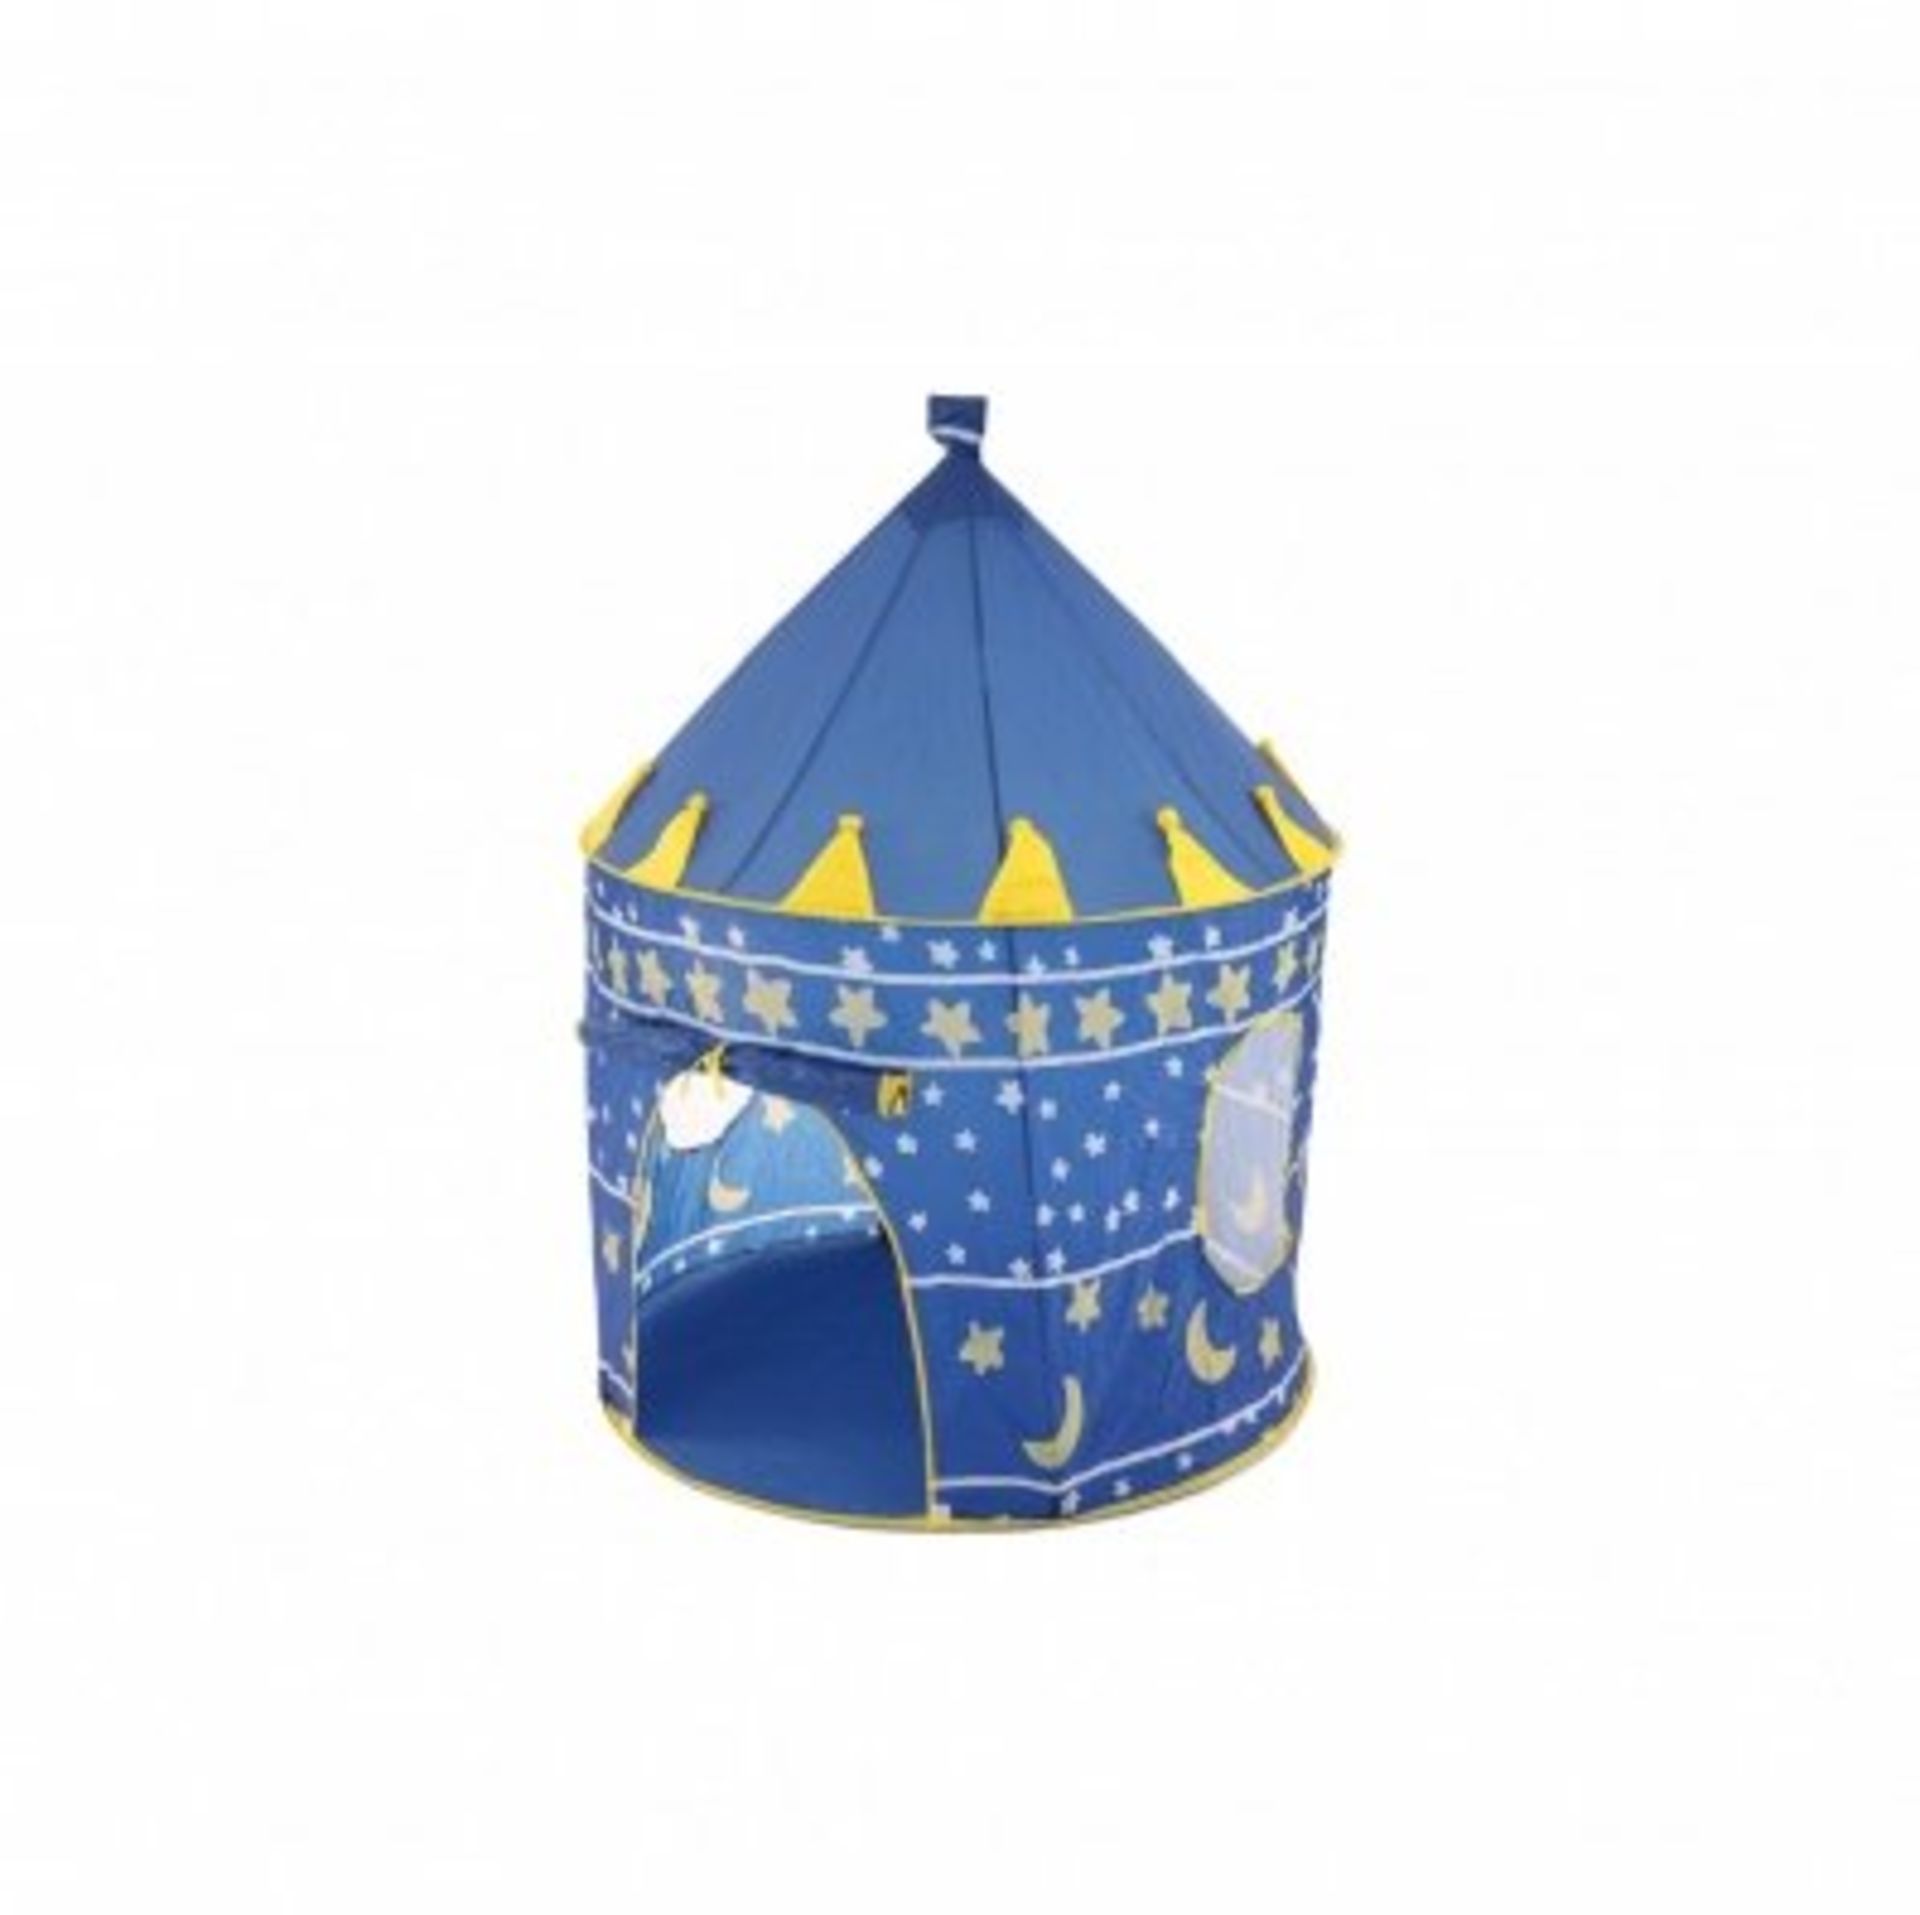 (LF85) Prince Princess Blue Indoor Outdoor Garden Beach Toy Play House Tent Your children wi...